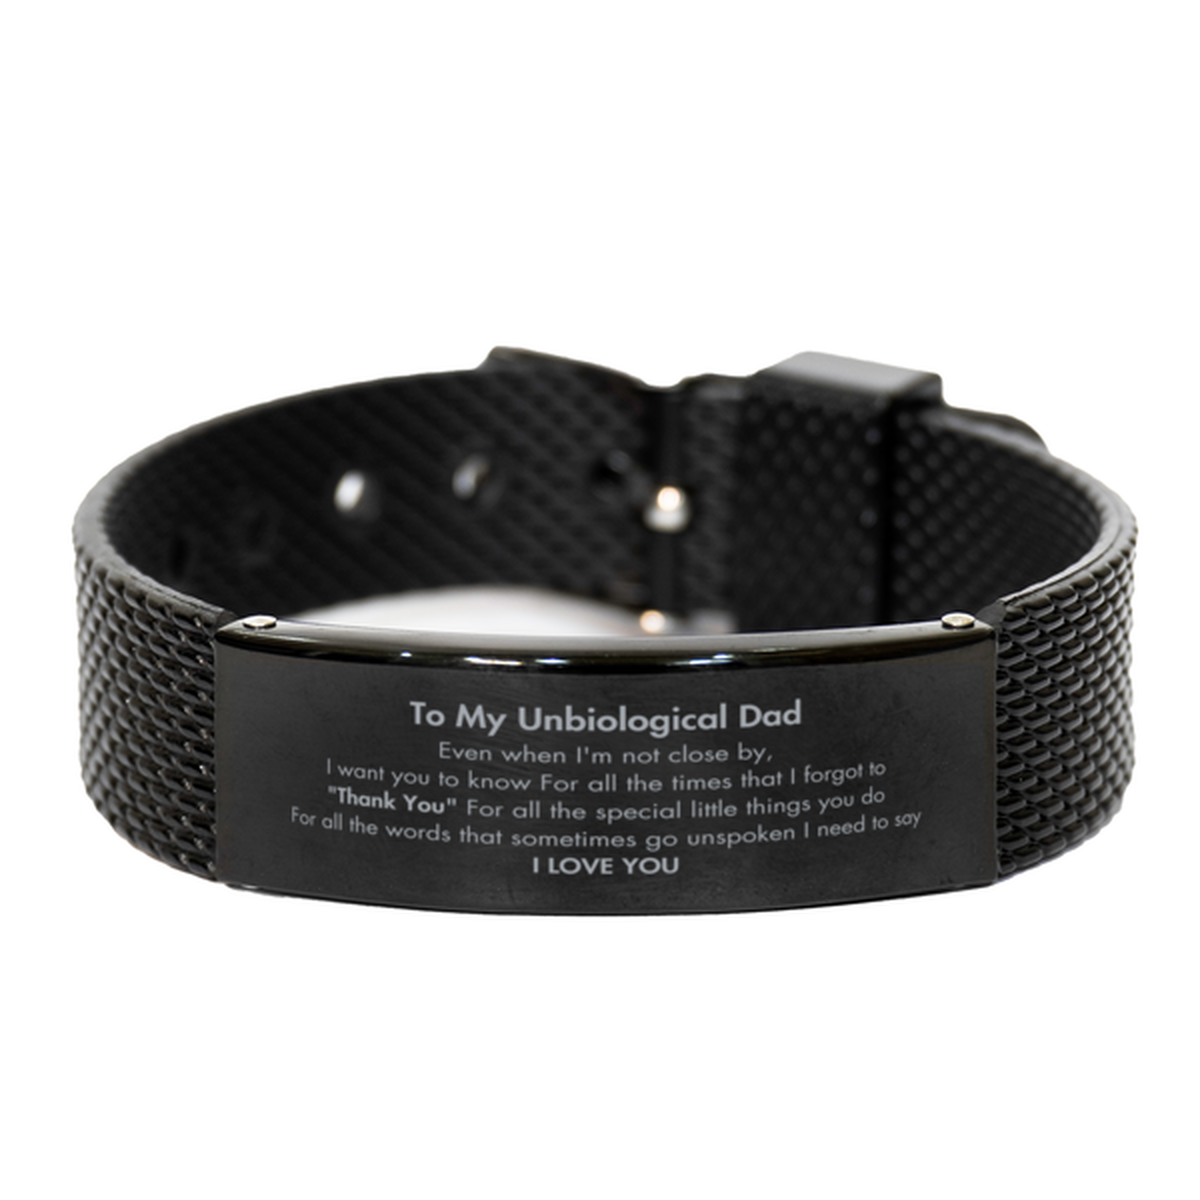 Thank You Gifts for Unbiological Dad, Keepsake Black Shark Mesh Bracelet Gifts for Unbiological Dad Birthday Mother's day Father's Day Unbiological Dad For all the words That sometimes go unspoken I need to say I LOVE YOU